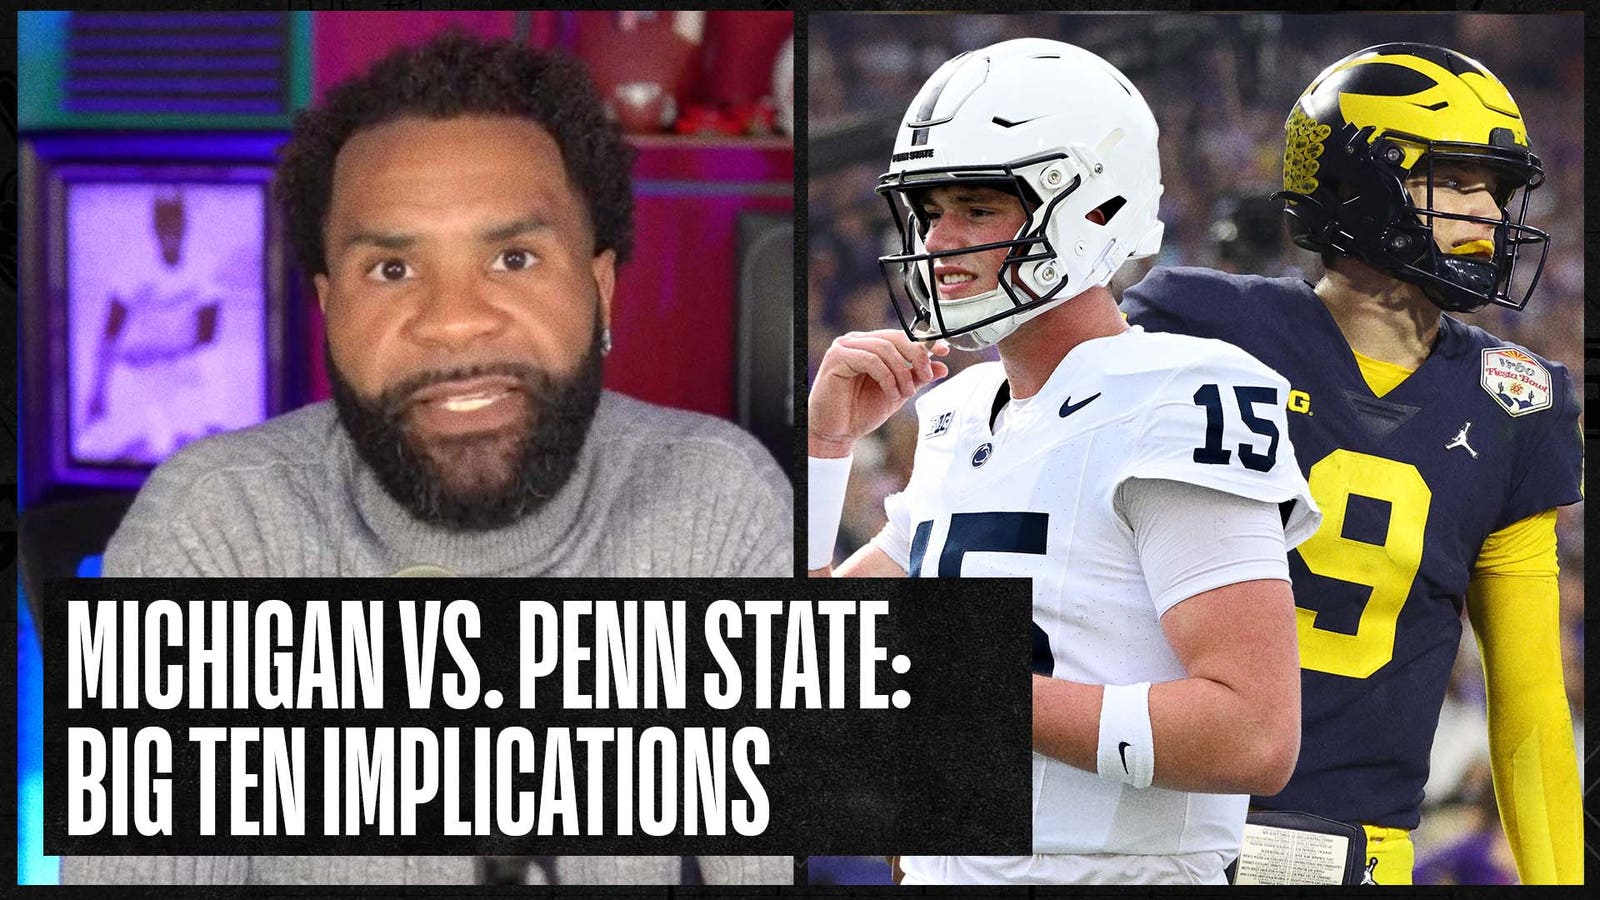 Michigan vs. Penn State peview: Big Ten implications on the line